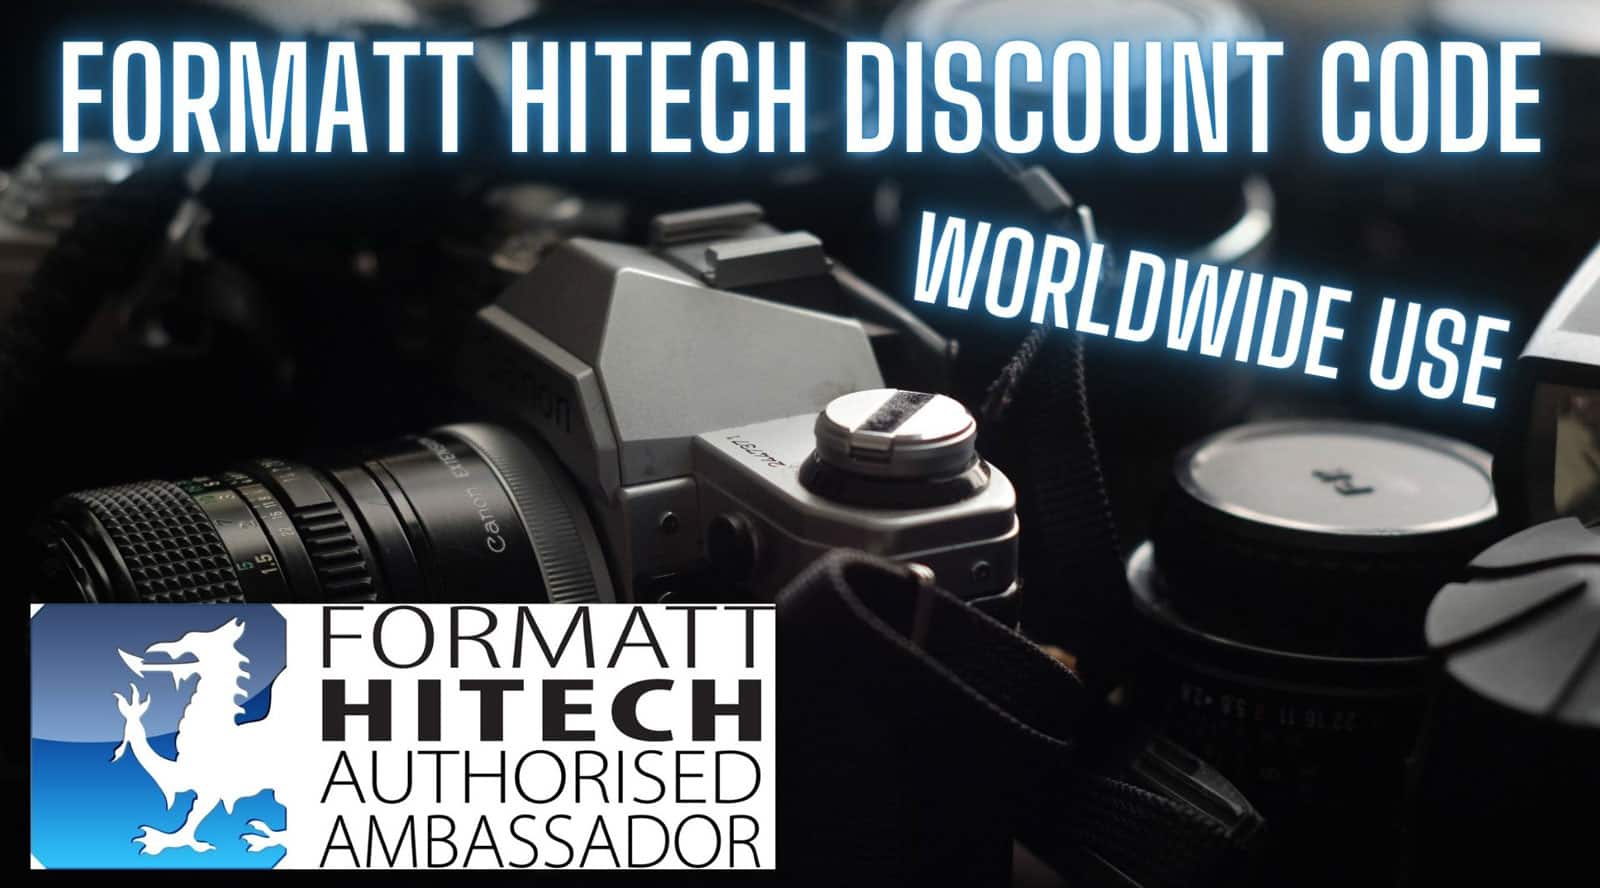 Formatt Hitech Logo and discount code text with a camera.